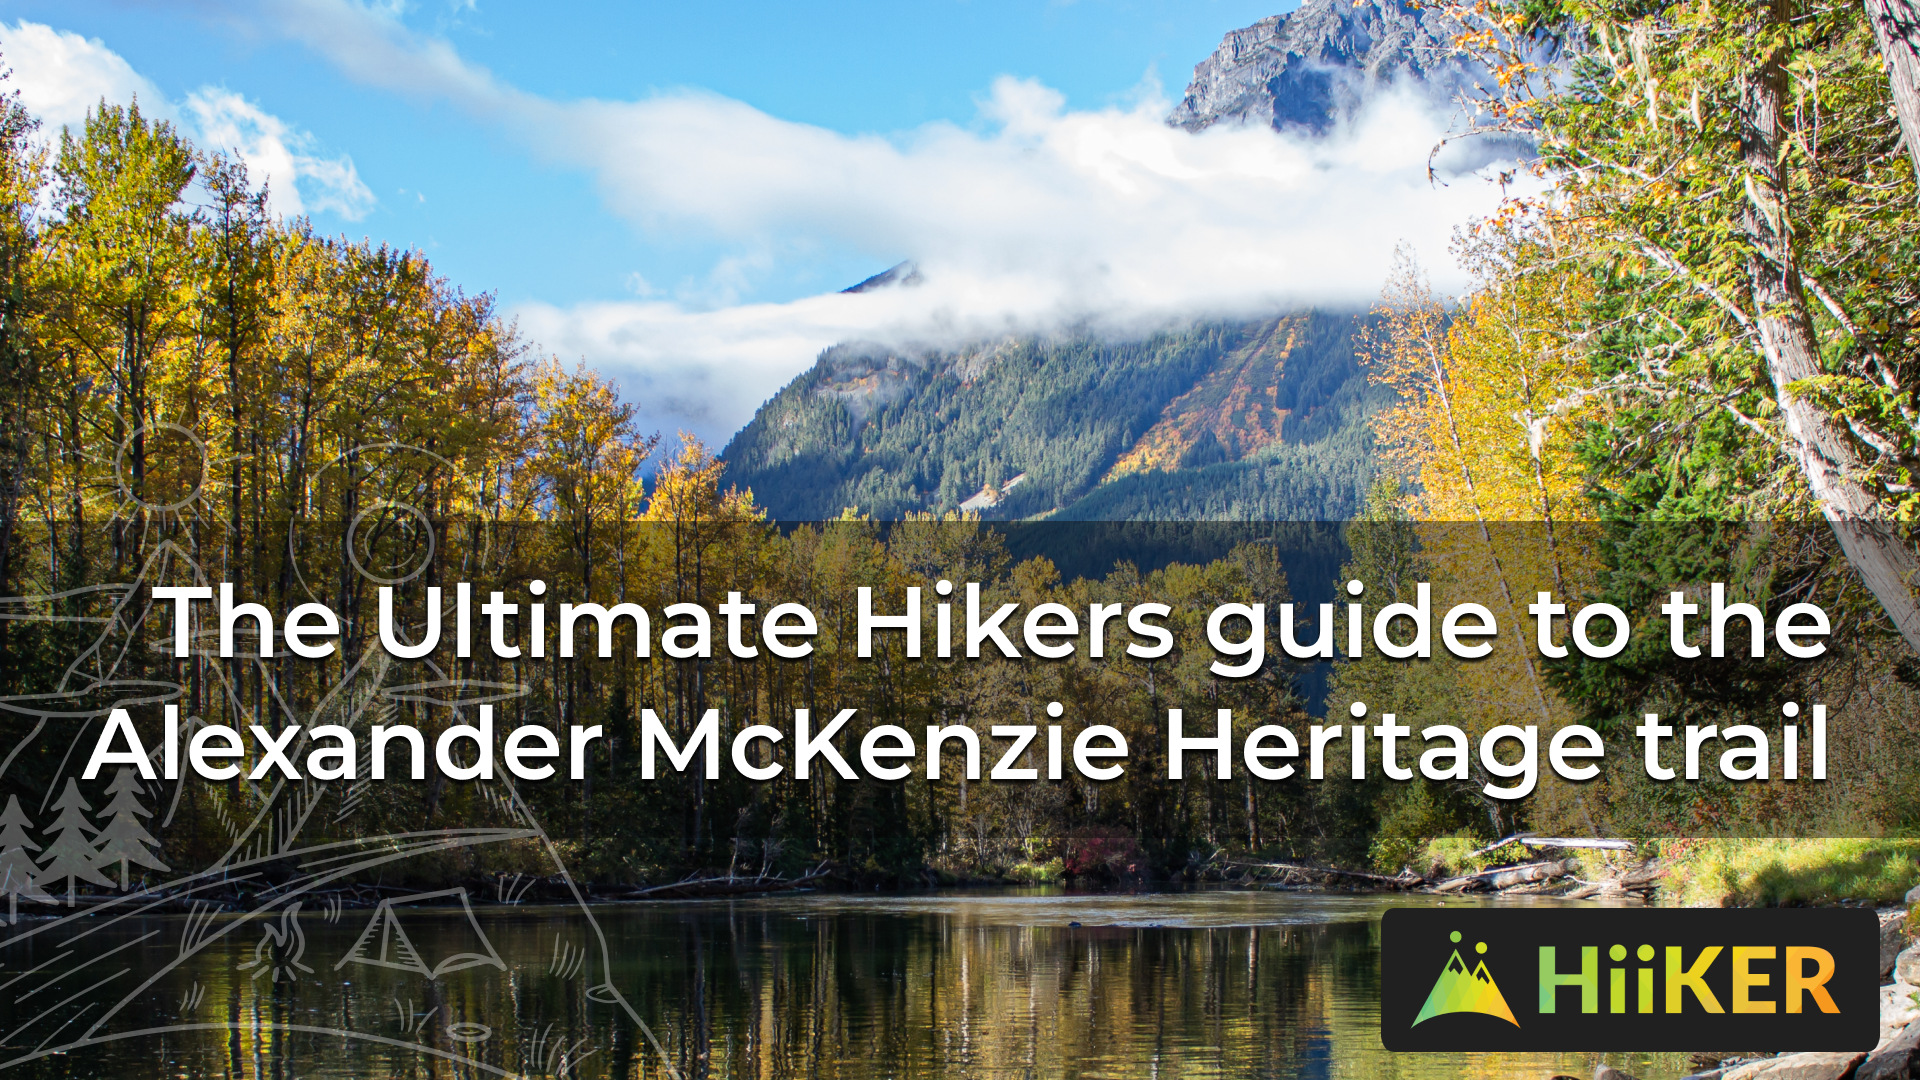 The Ultimate Hiker’s guide to the Alexander Mackenzie Heritage Trail